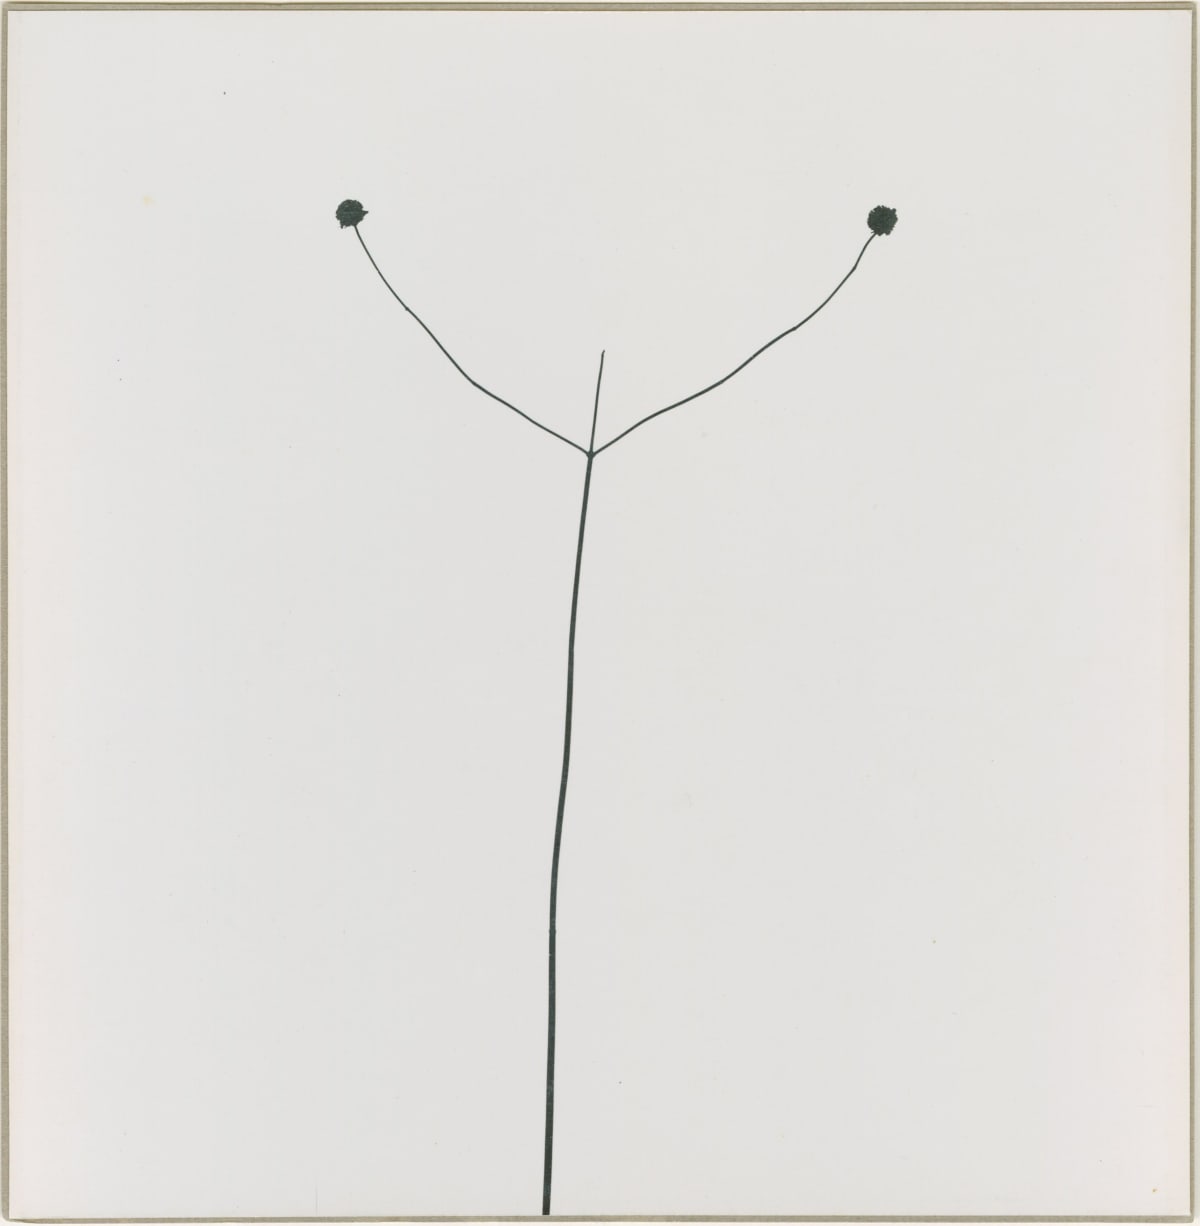 black minimalist weed with two prongs against white gray negative space background by Harry Callahan